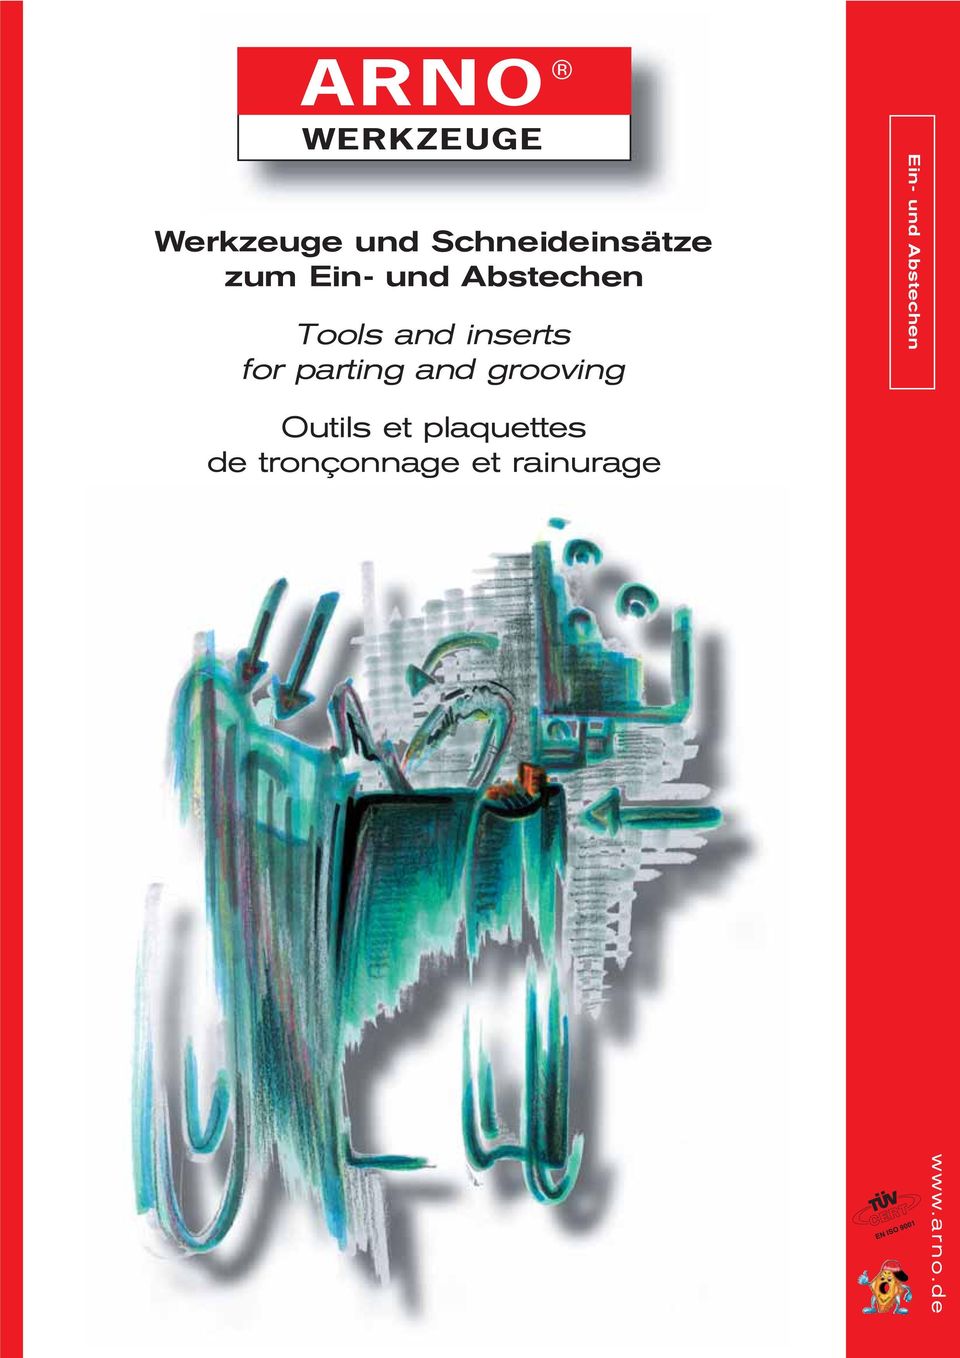 parting and grooving Ein- und Abstechen Outils